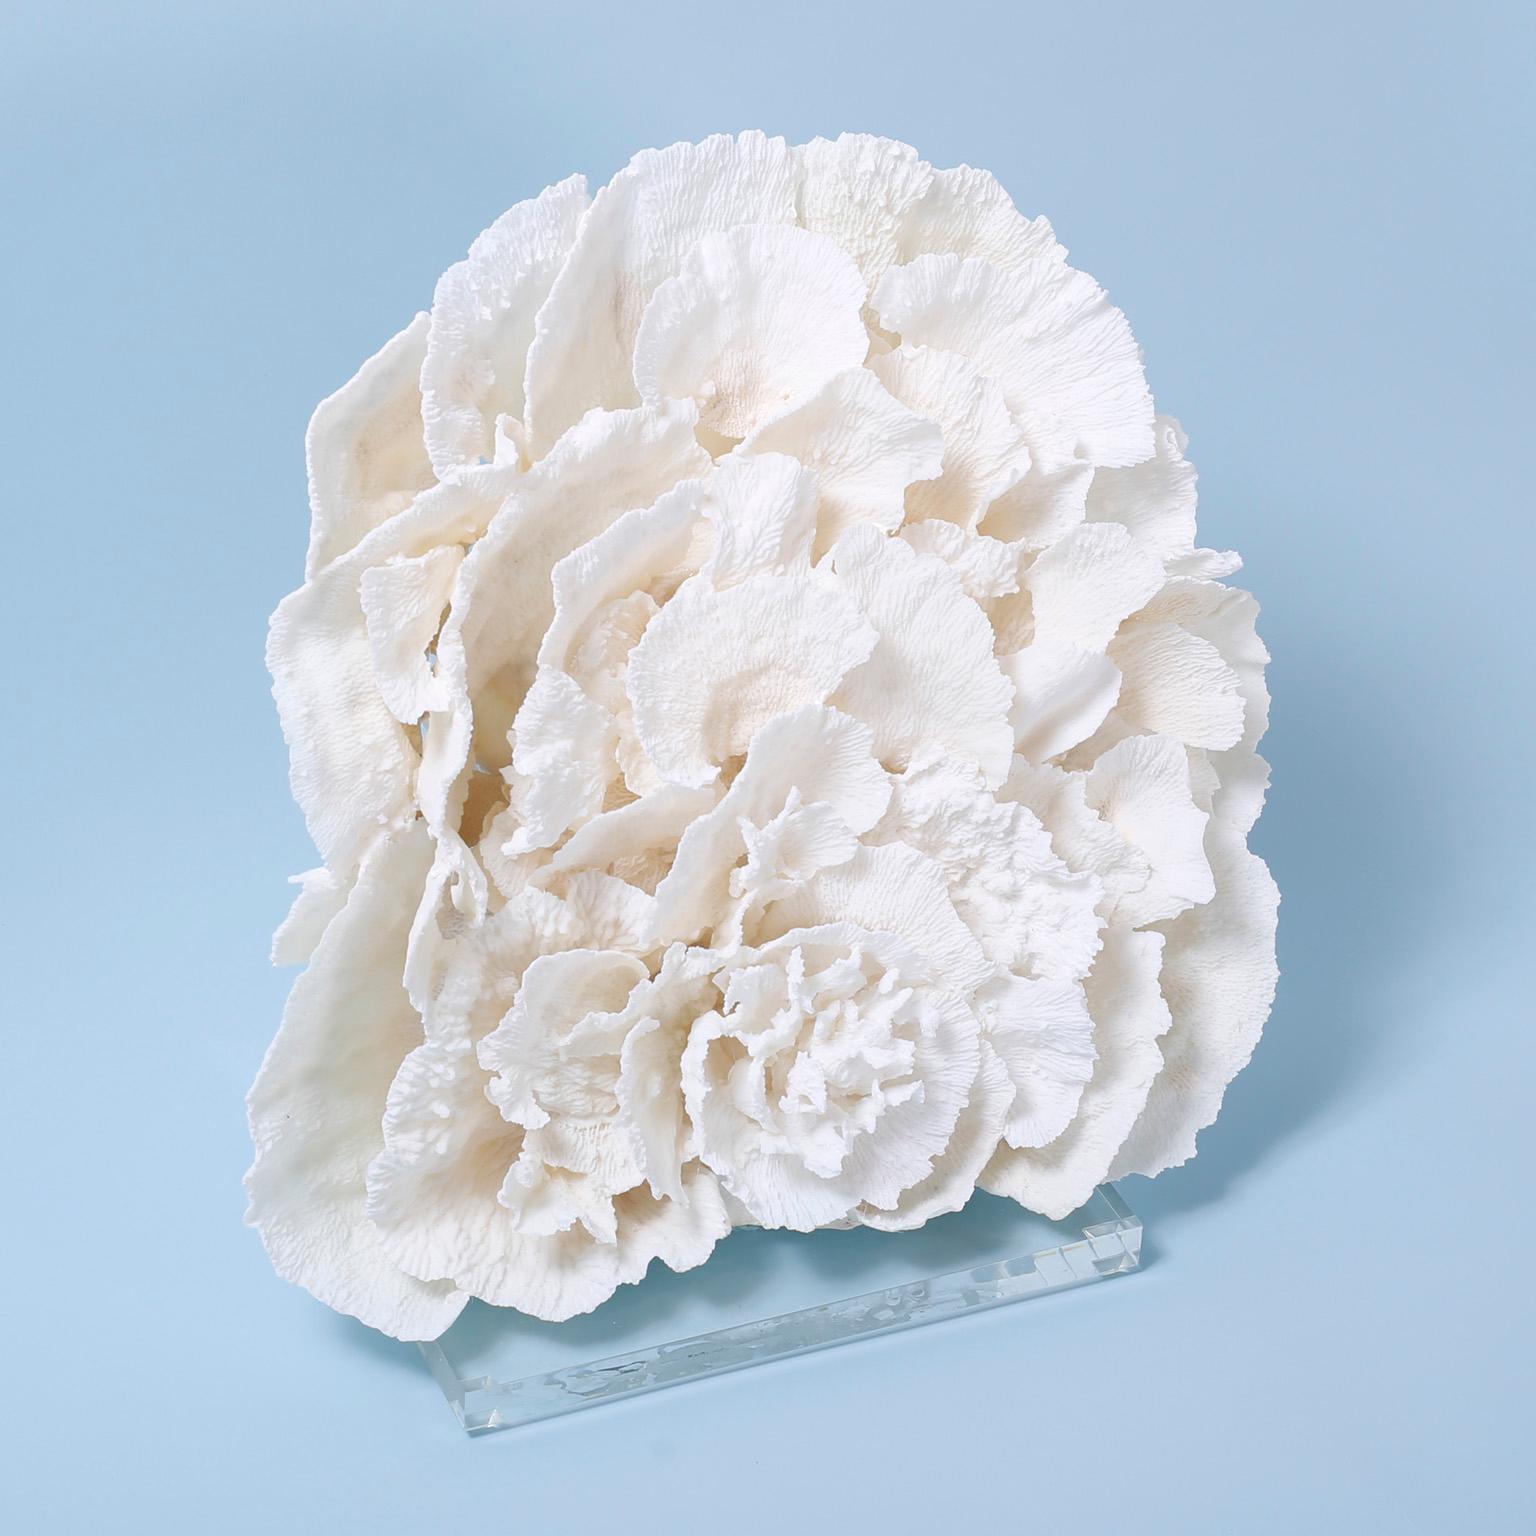 Impressive large white or merulina coral sculpture or assemblage designed and crafted by F. S. Henemader with its striking bleached white color, sea inspired form and cloud like texture. Presented on a Lucite base.

Coral being exported outside of